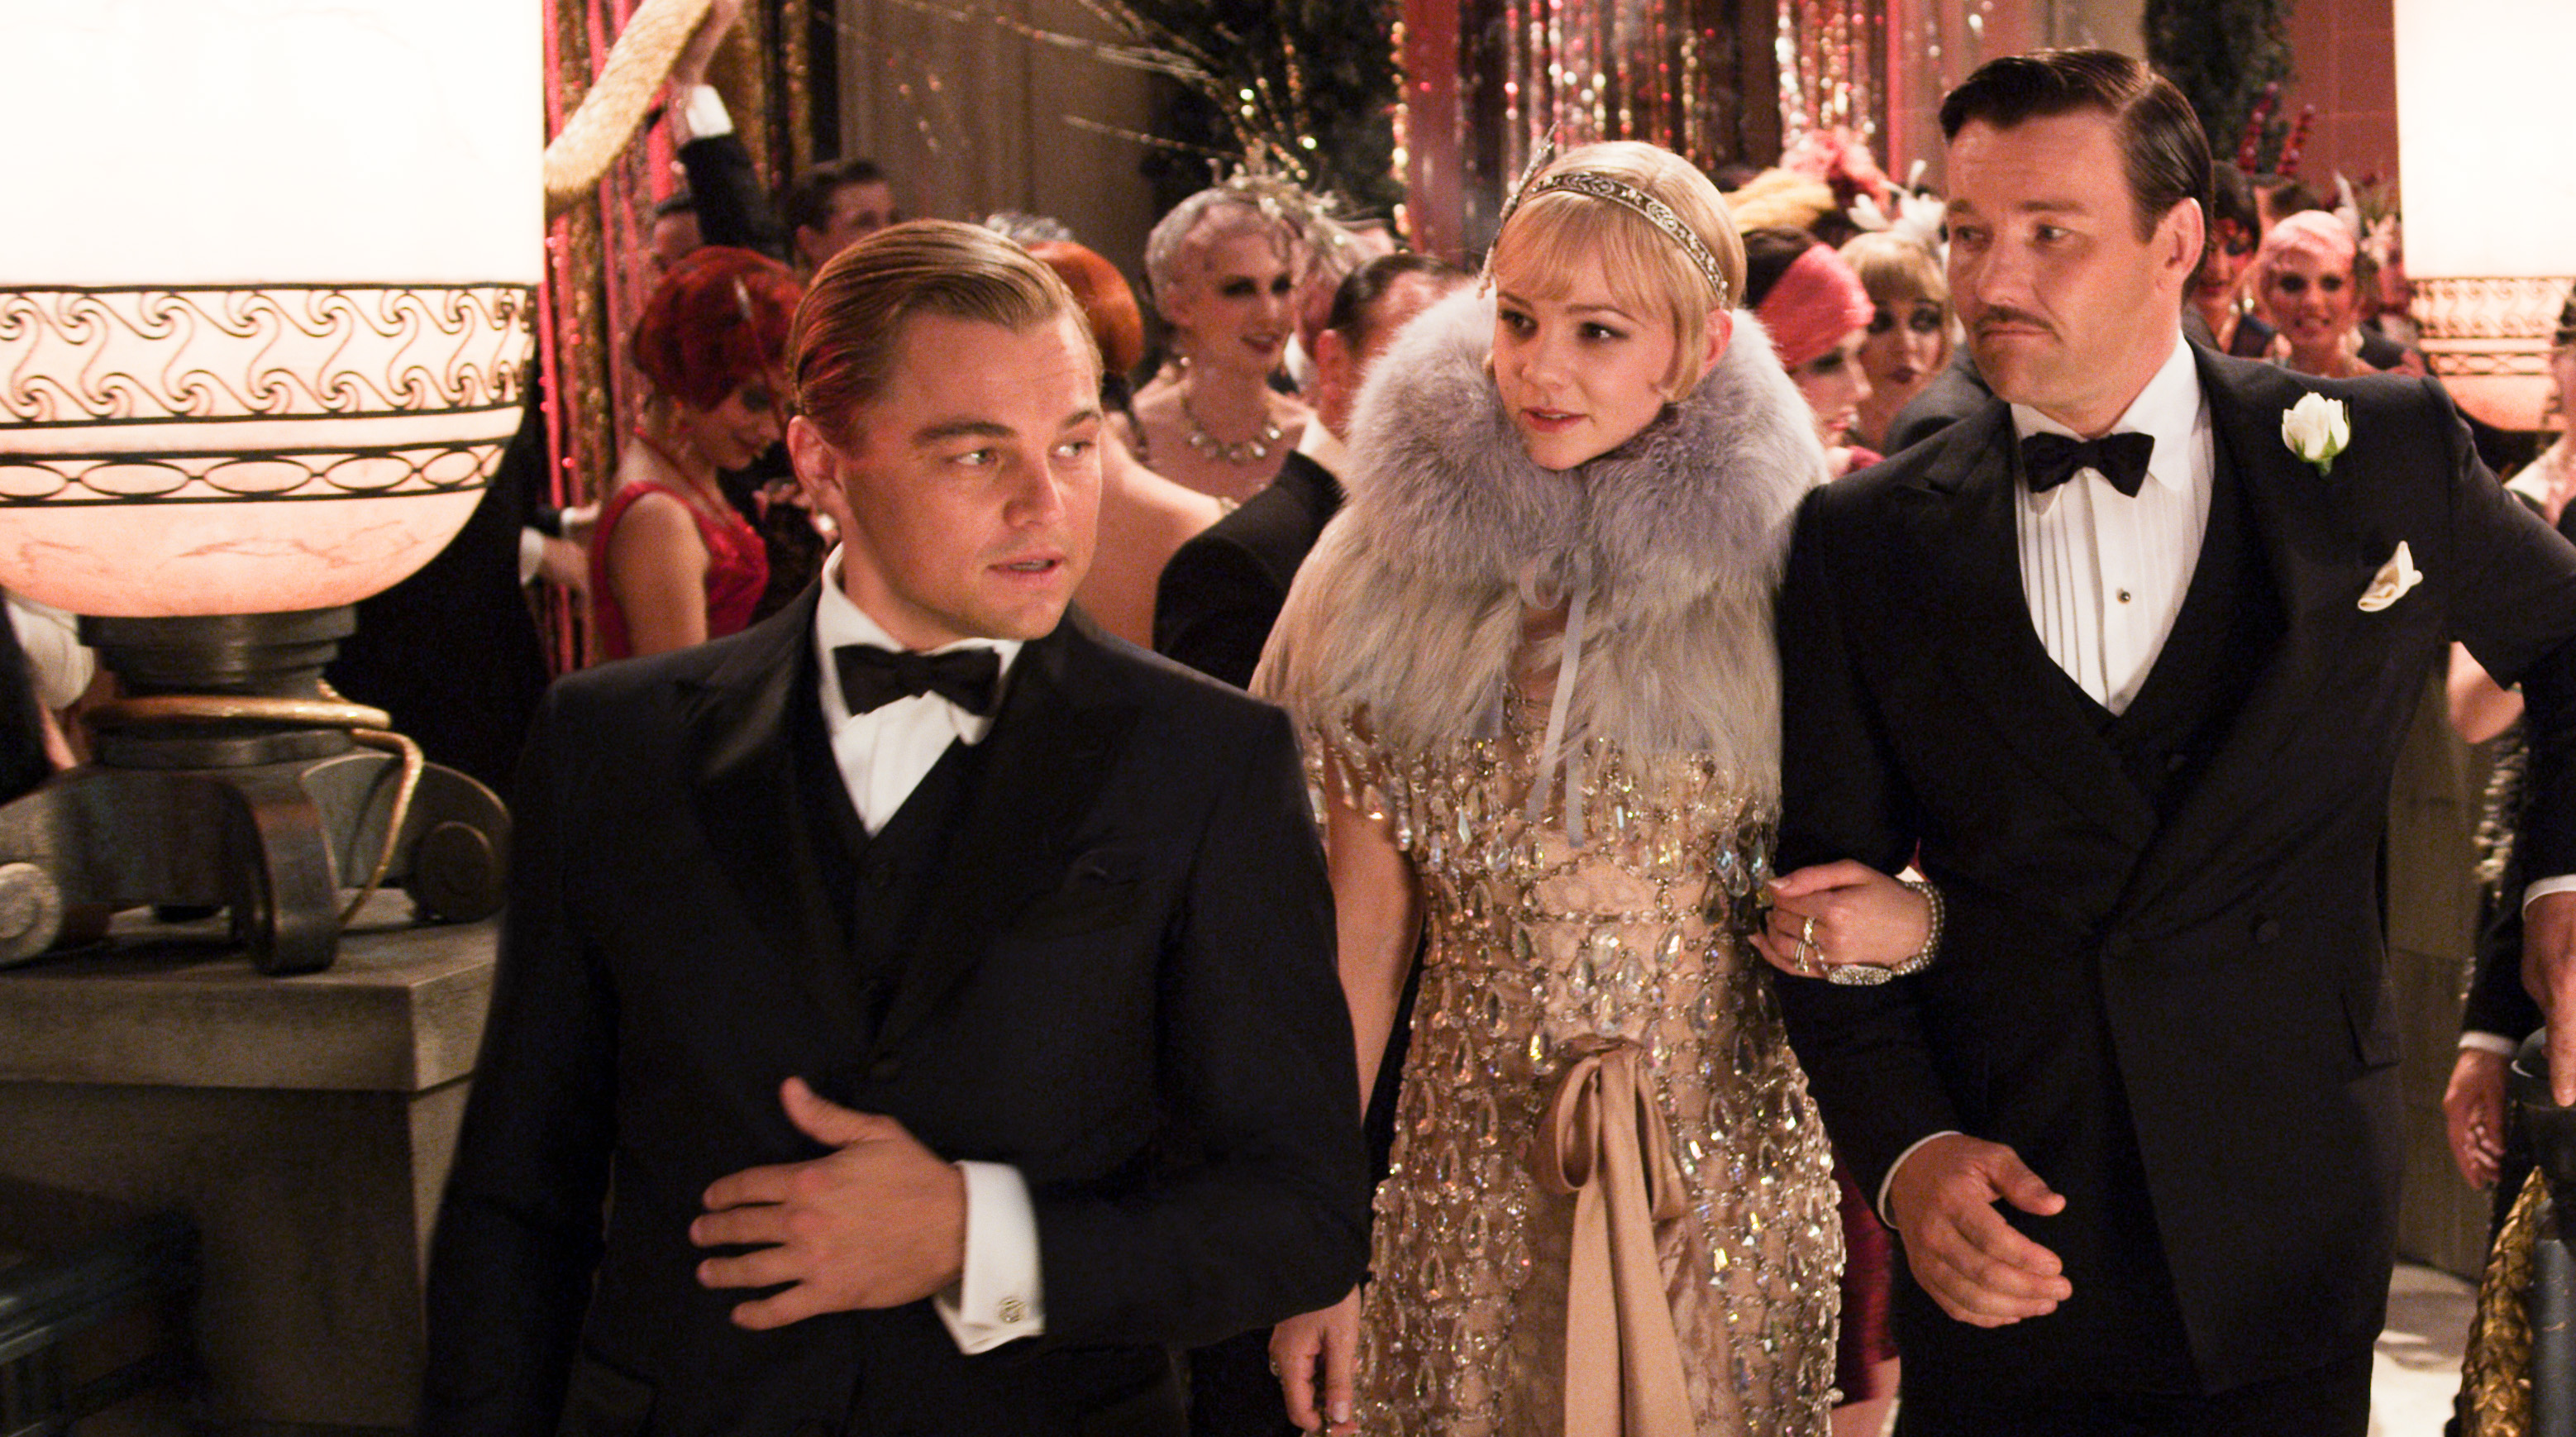 THE GREAT GATSBY 3rd Trailer w/ New Music by Beyoncé x André 3000, Lana